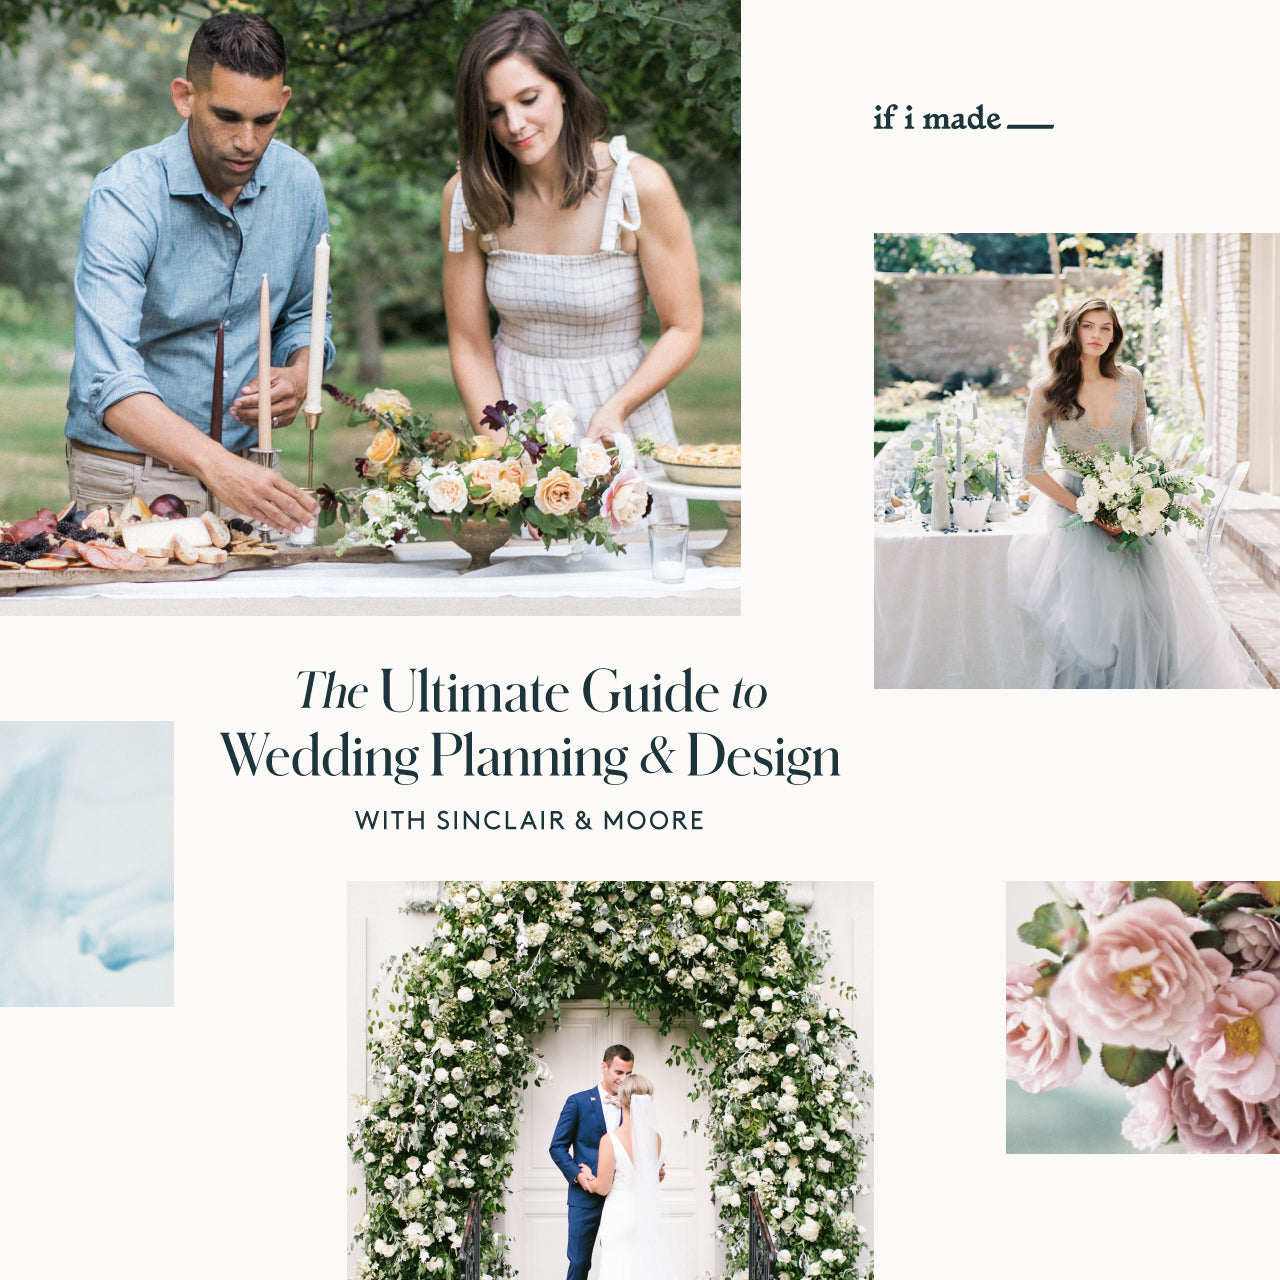 The Ultimate Guide to Wedding Planning & Design with Sinclair & Moore (SOP)